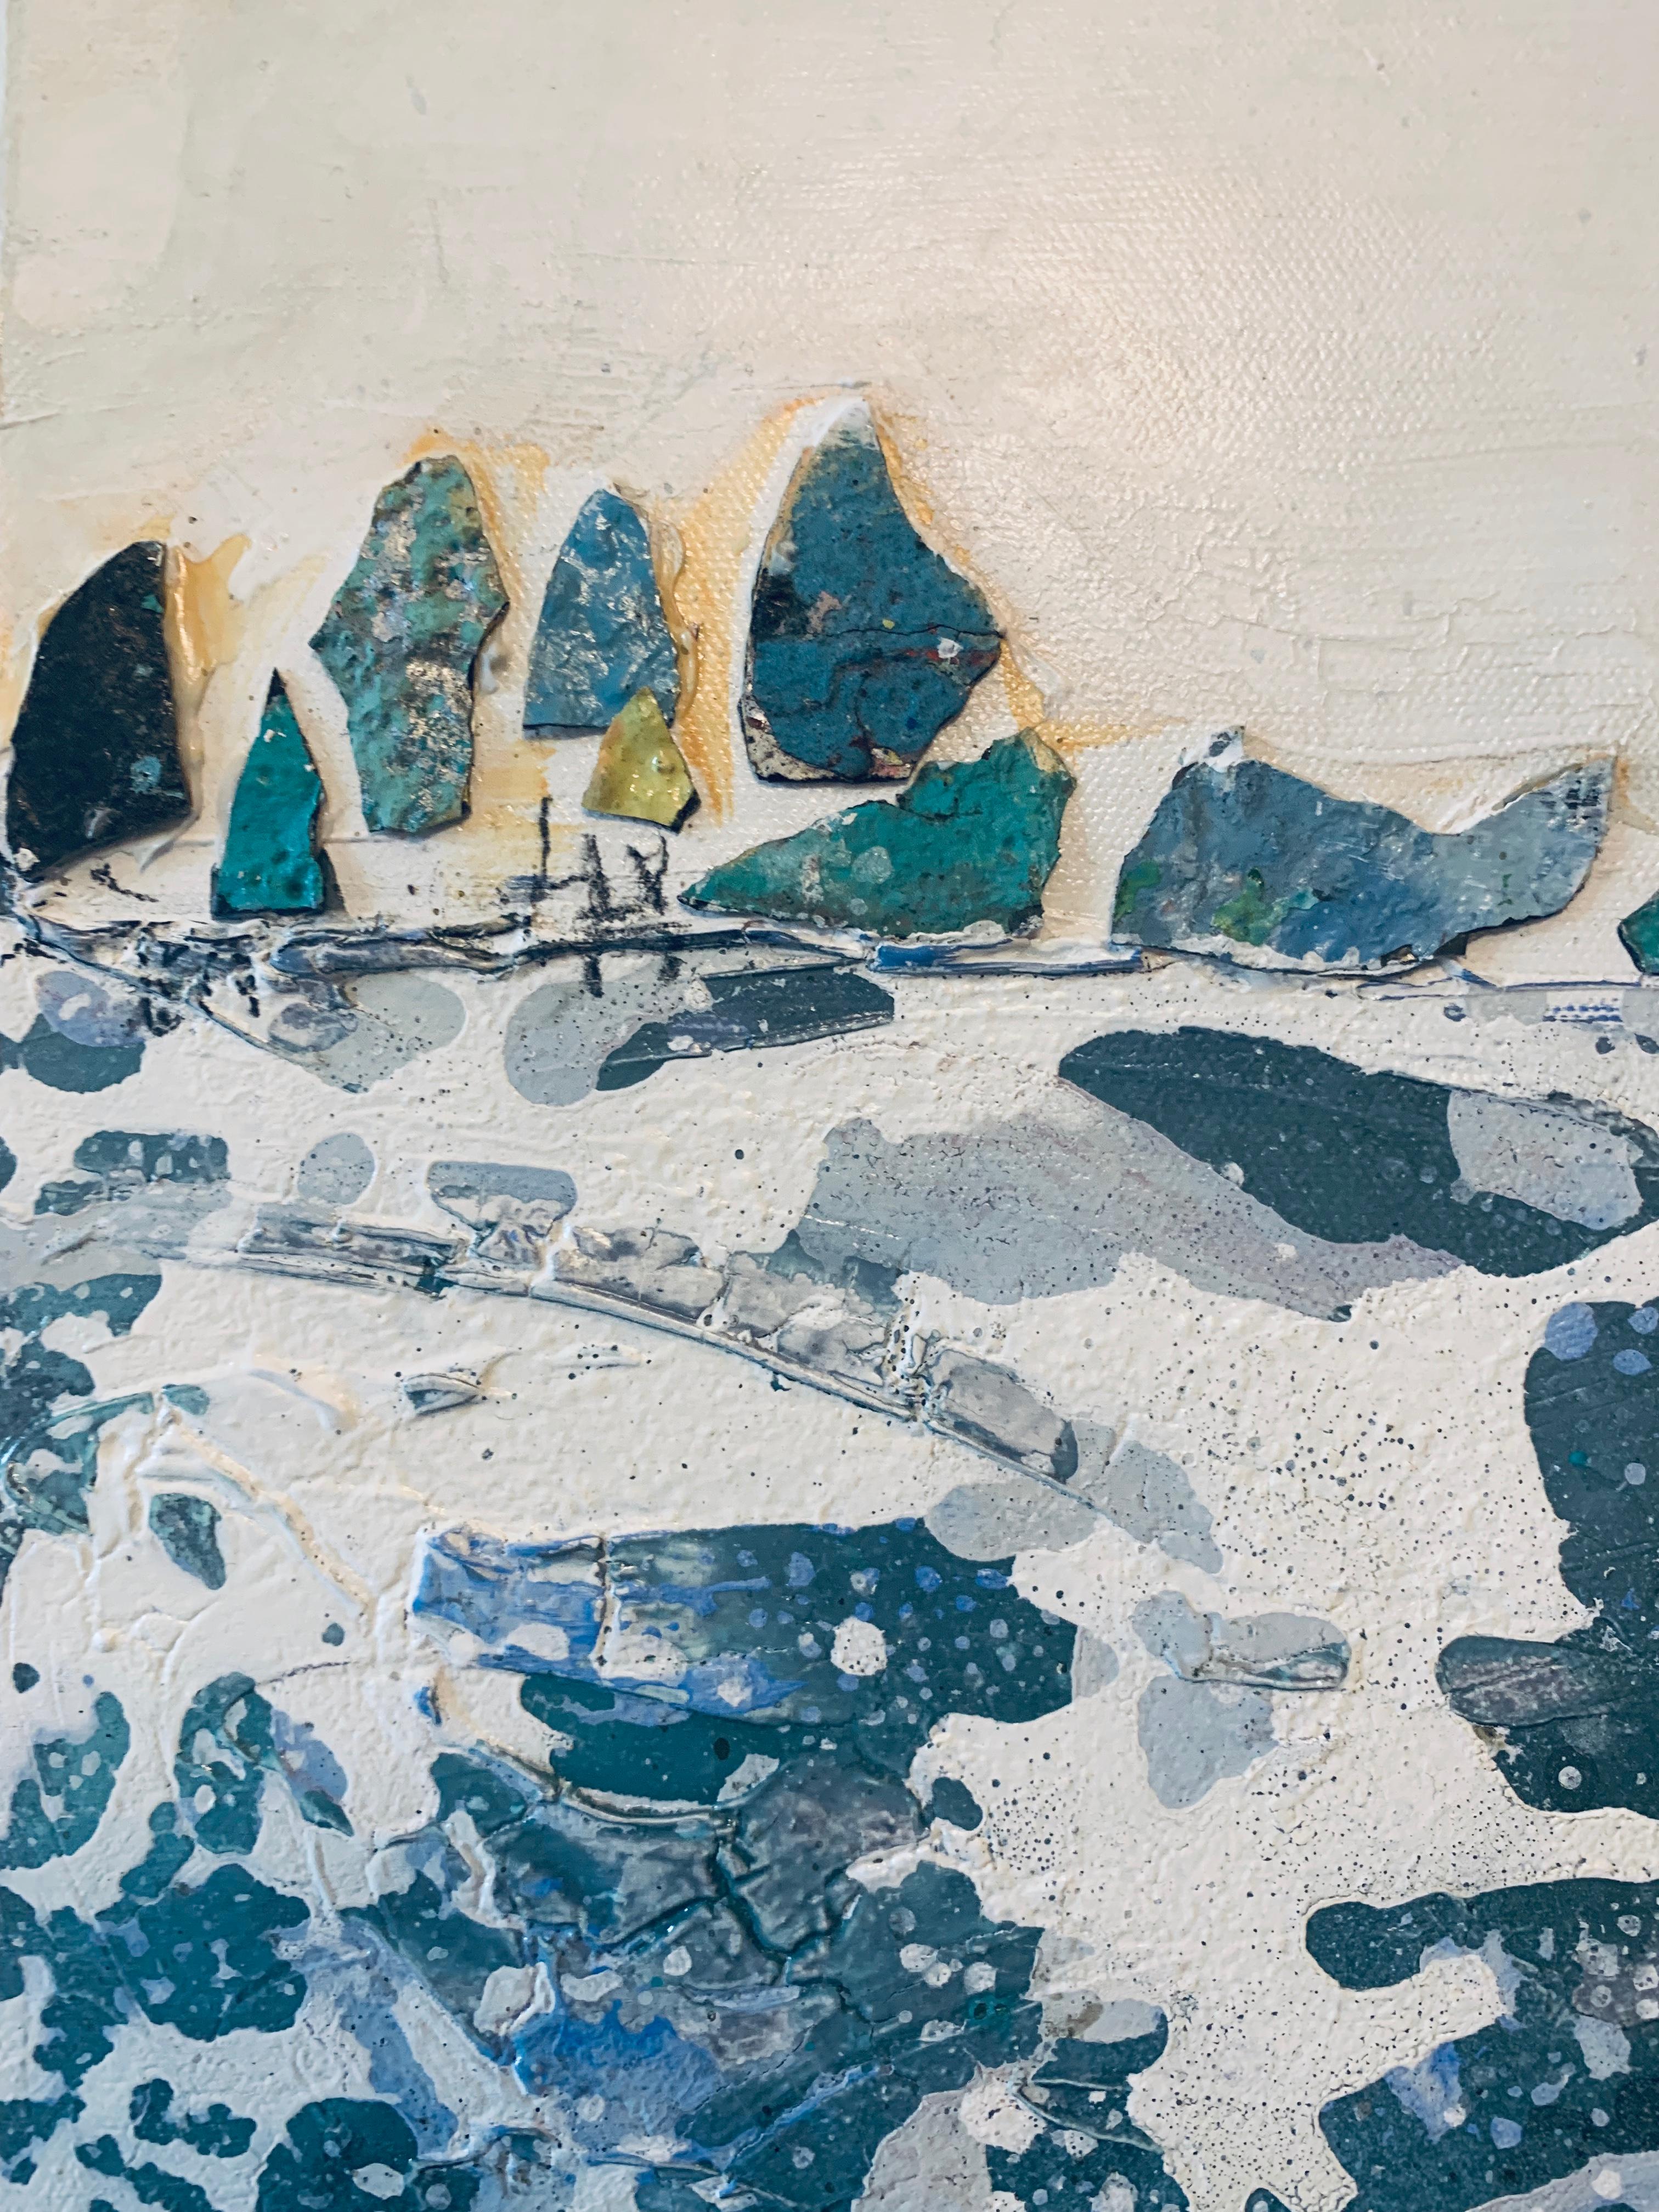 Seaside 028 by Gunda Jastorff - Contemporary small abstract landscape painting  1